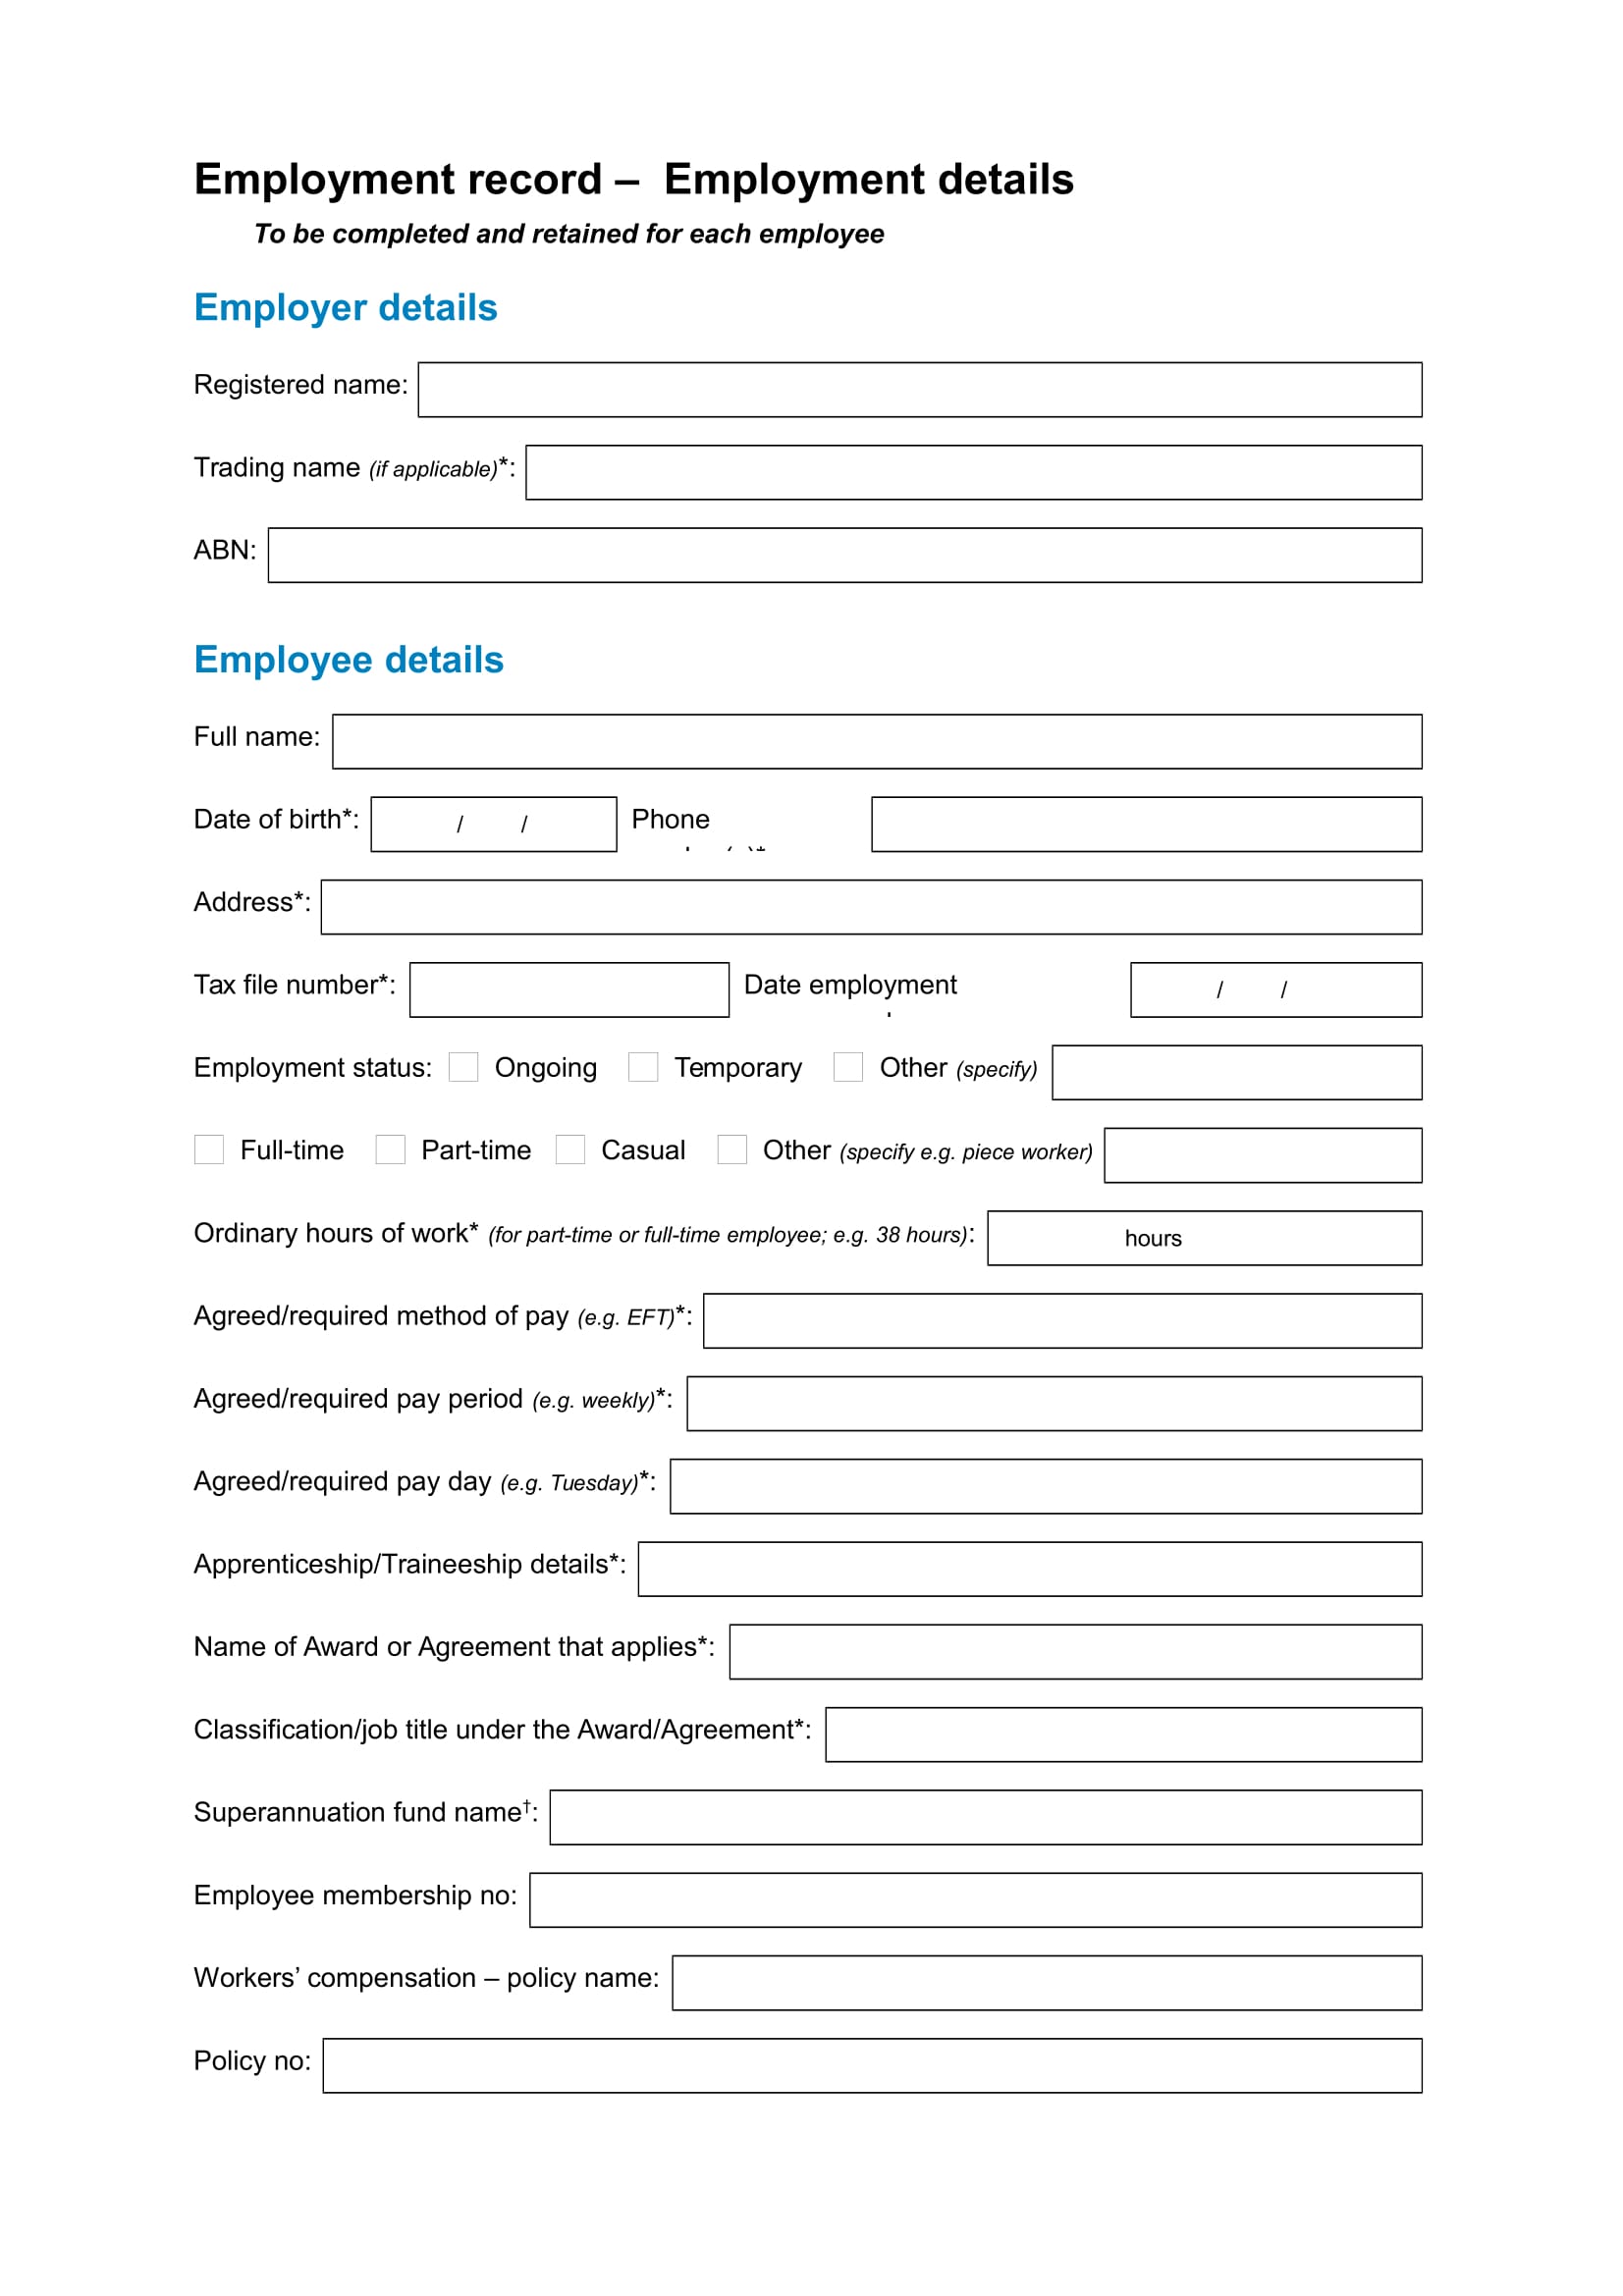 employment record employee details form example